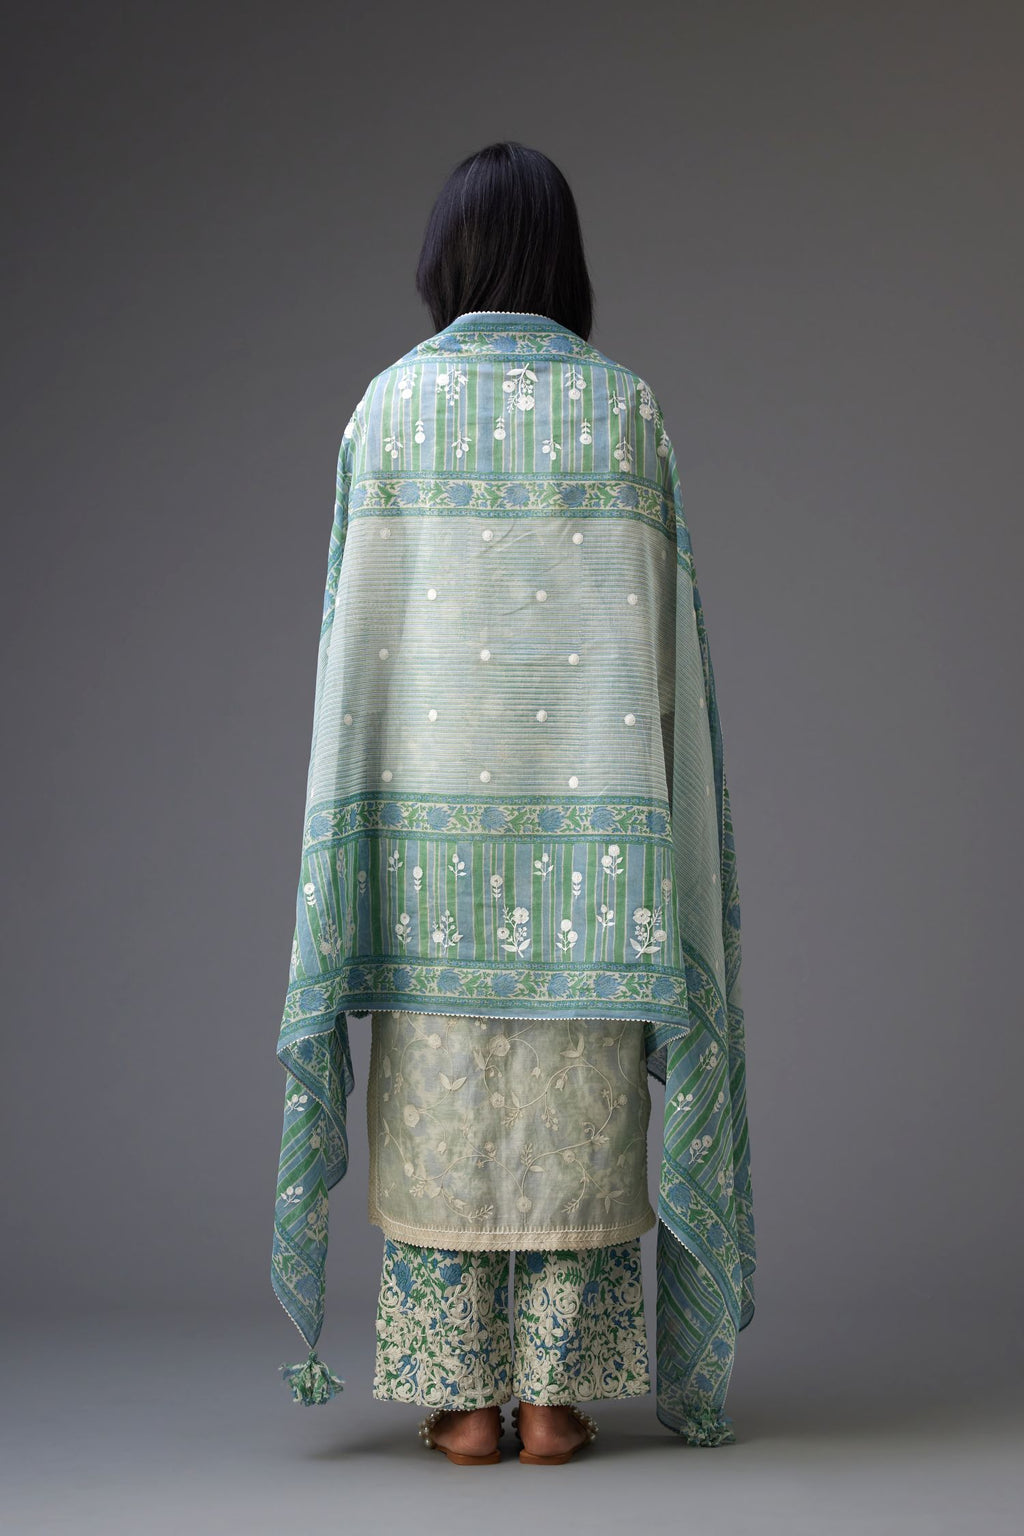 Blue & green hand block printed dupatta with all over assorted flower embroidery, finished with ric rac lace.